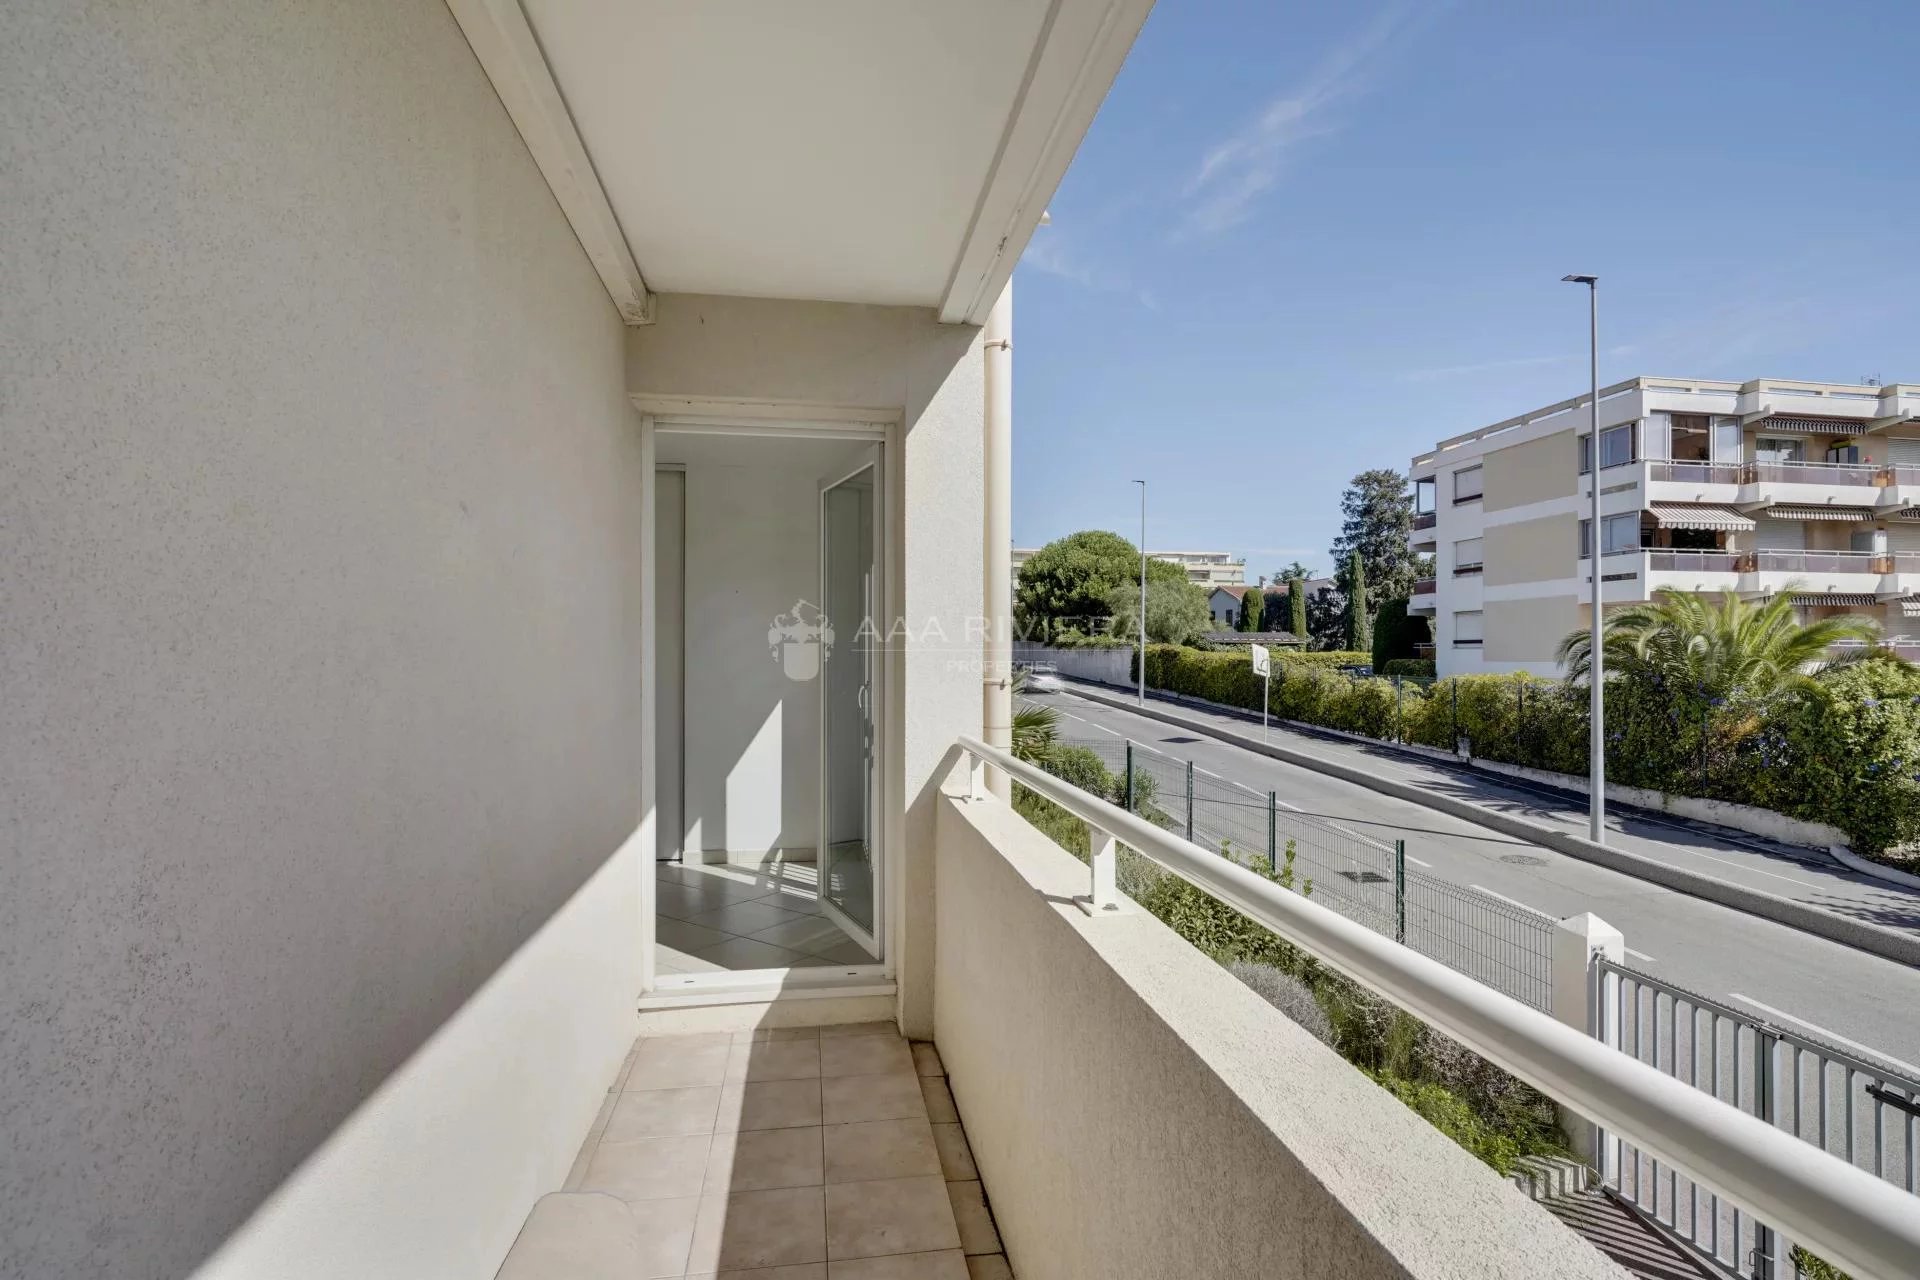 SOLE AGENT - UNDER OFFER  - 2 bedroom apt in residence with pool right on the beaches of Juan les Pins